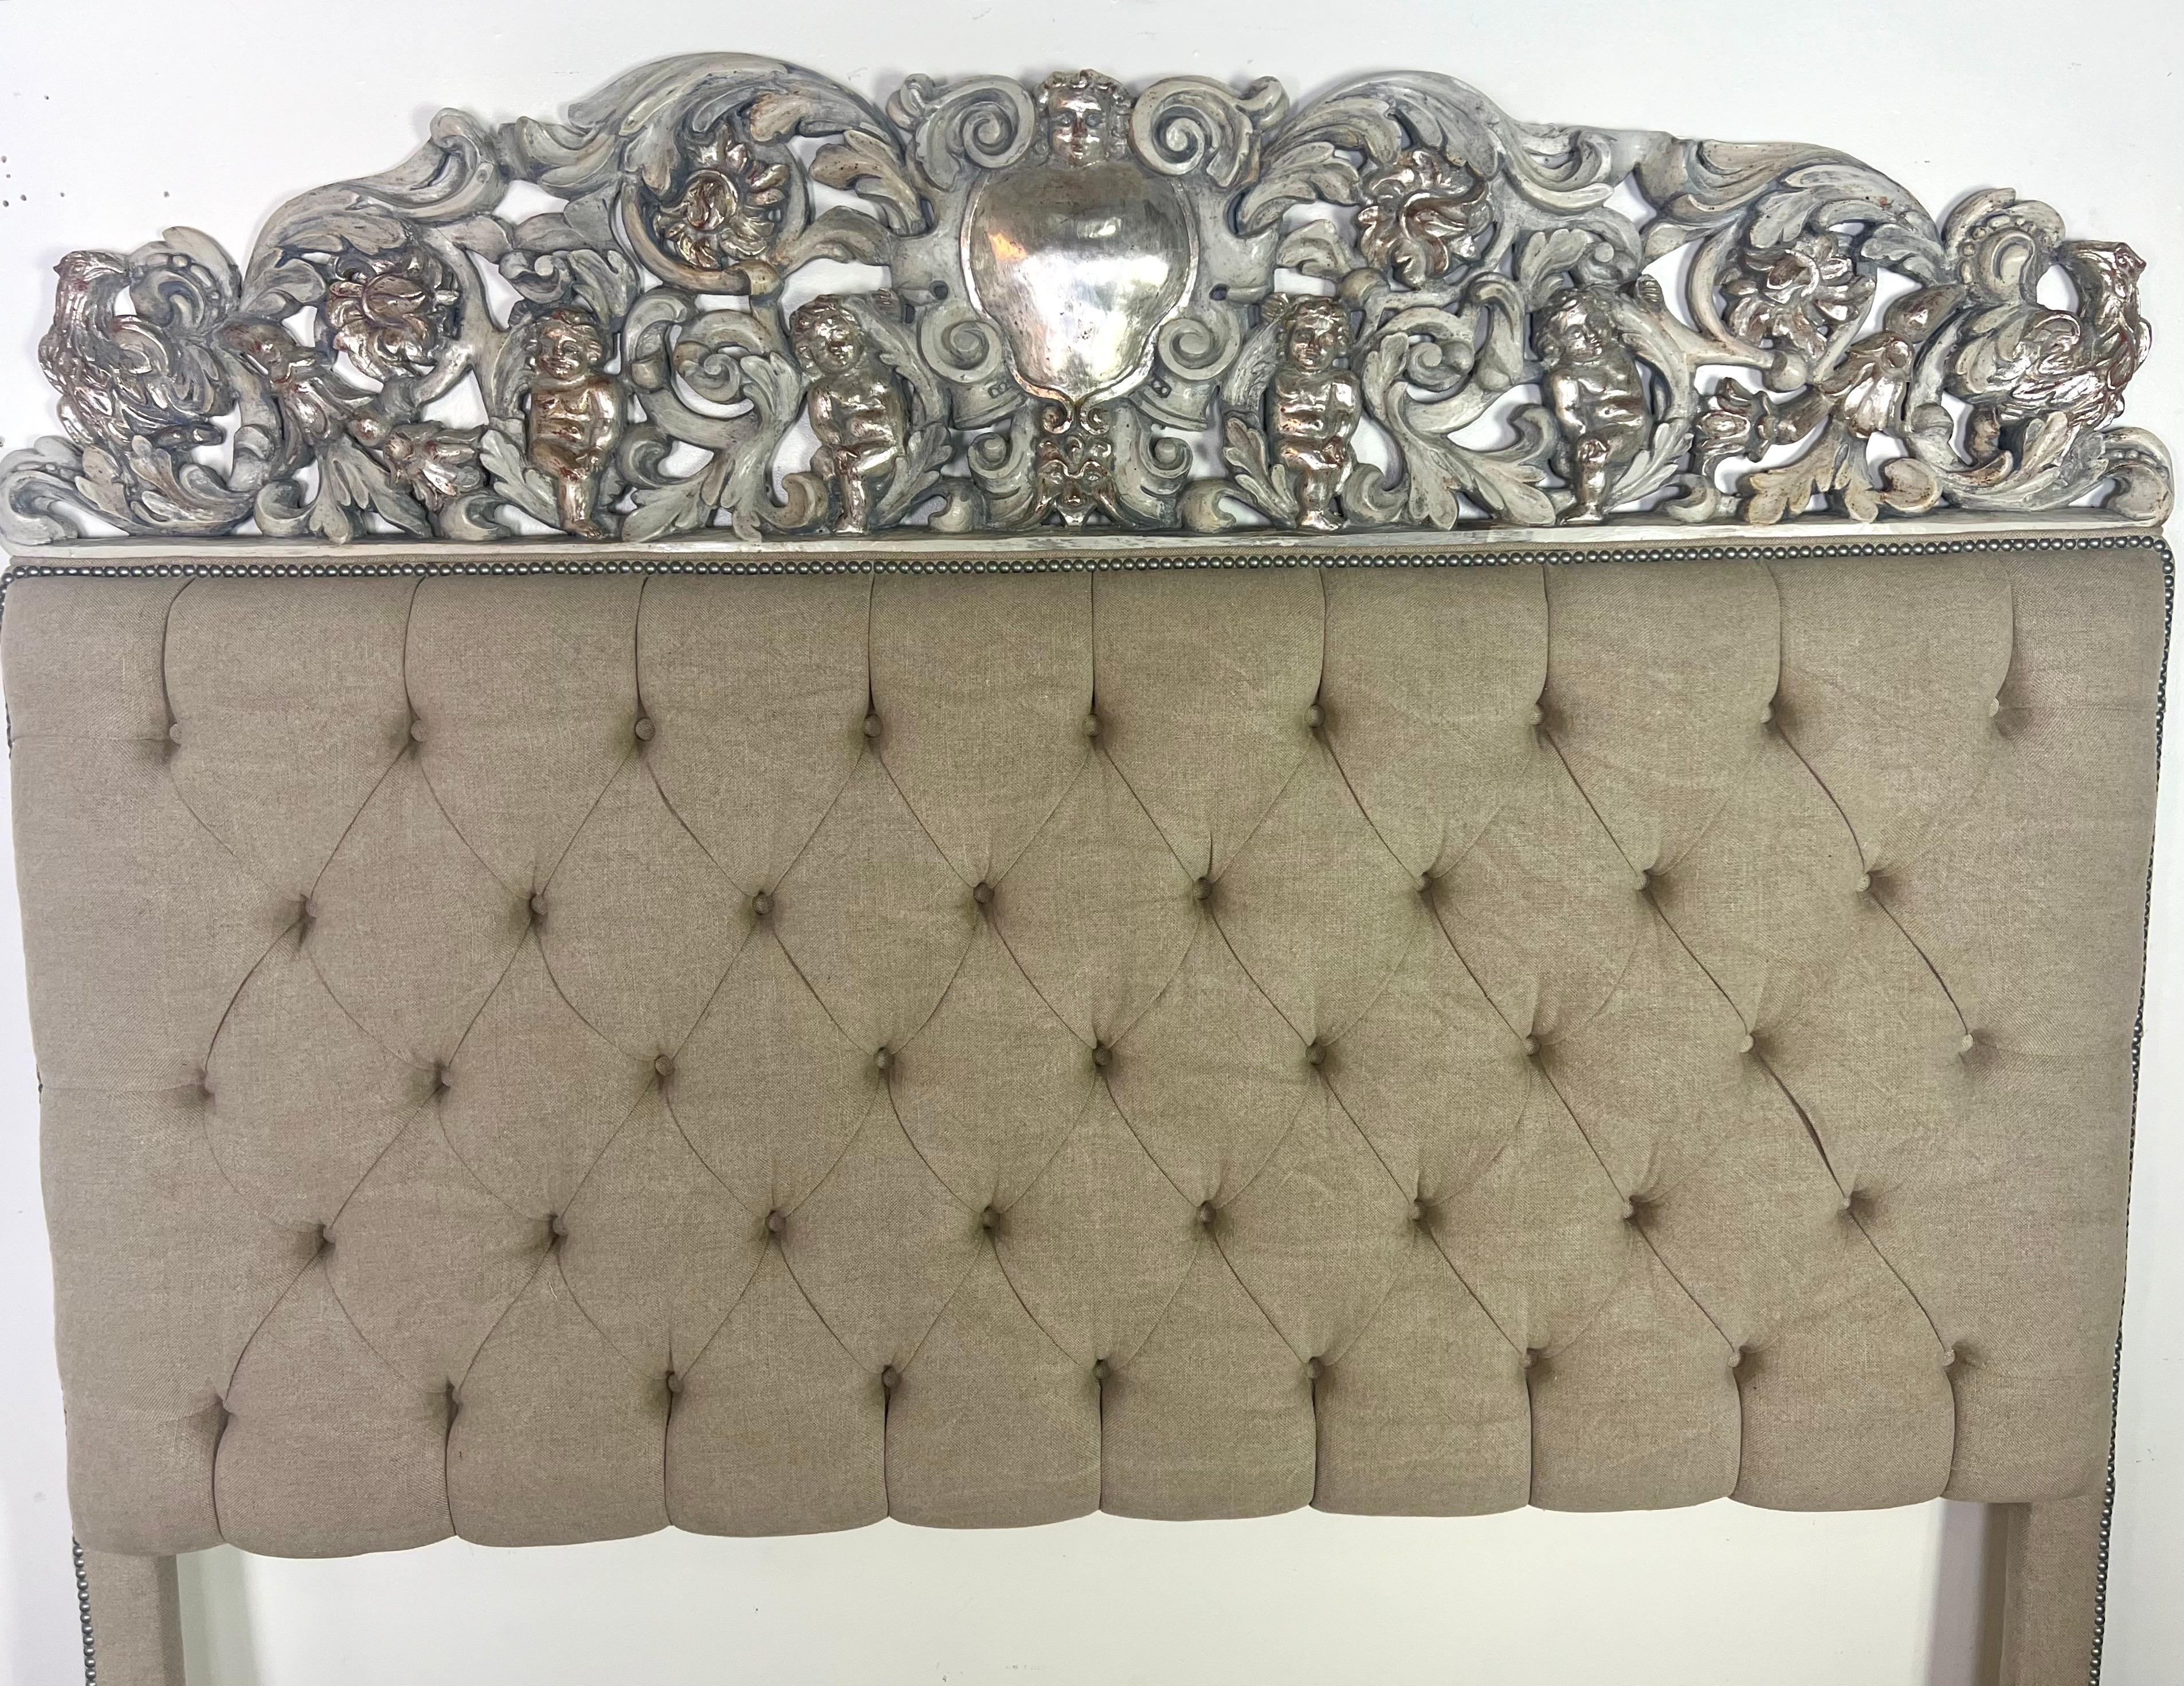 This custom headboard is incredibly exquisite and rich in detail.  The use of an Italian carved, painted, and silver-gilt panel as the main feature adds a remarkable historical and artistic value.  The panel is upholstered into the headboard with